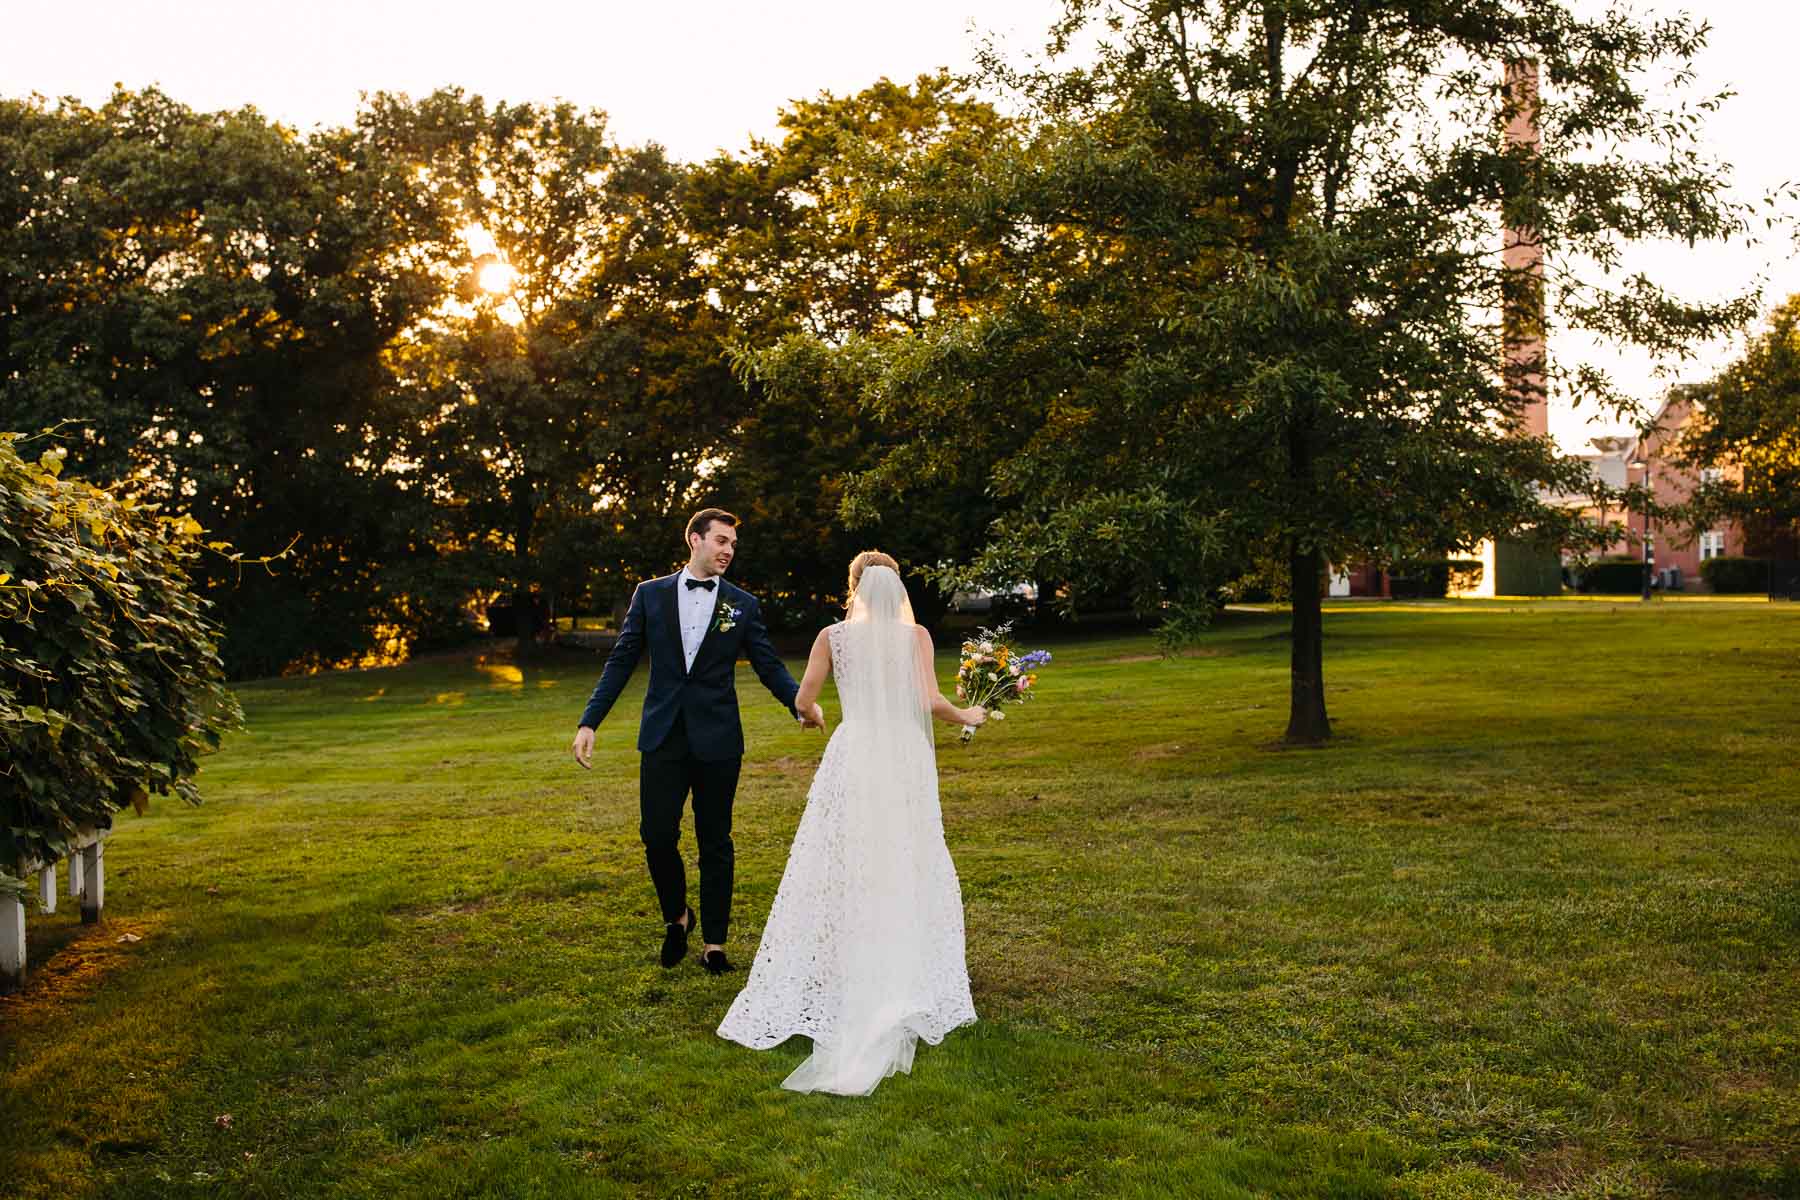 just after the ceremony | Kelly Benvenuto Photography